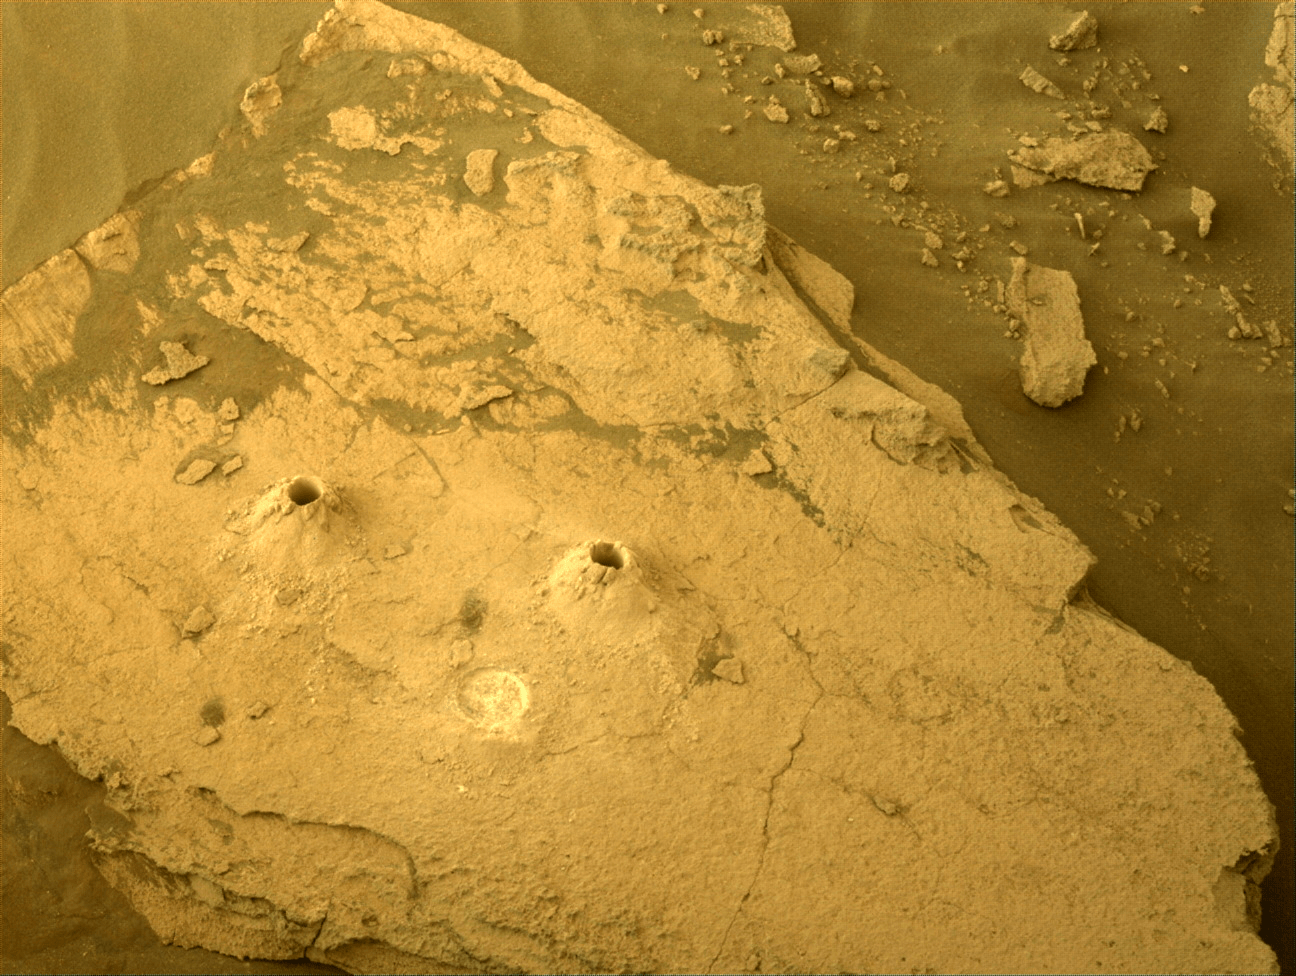 Image taken was taken by the Mars Perseverance rover after collecting the rock sample 11 at Skyland. Sample 10 and 11 drill hole with an abrasion patch.